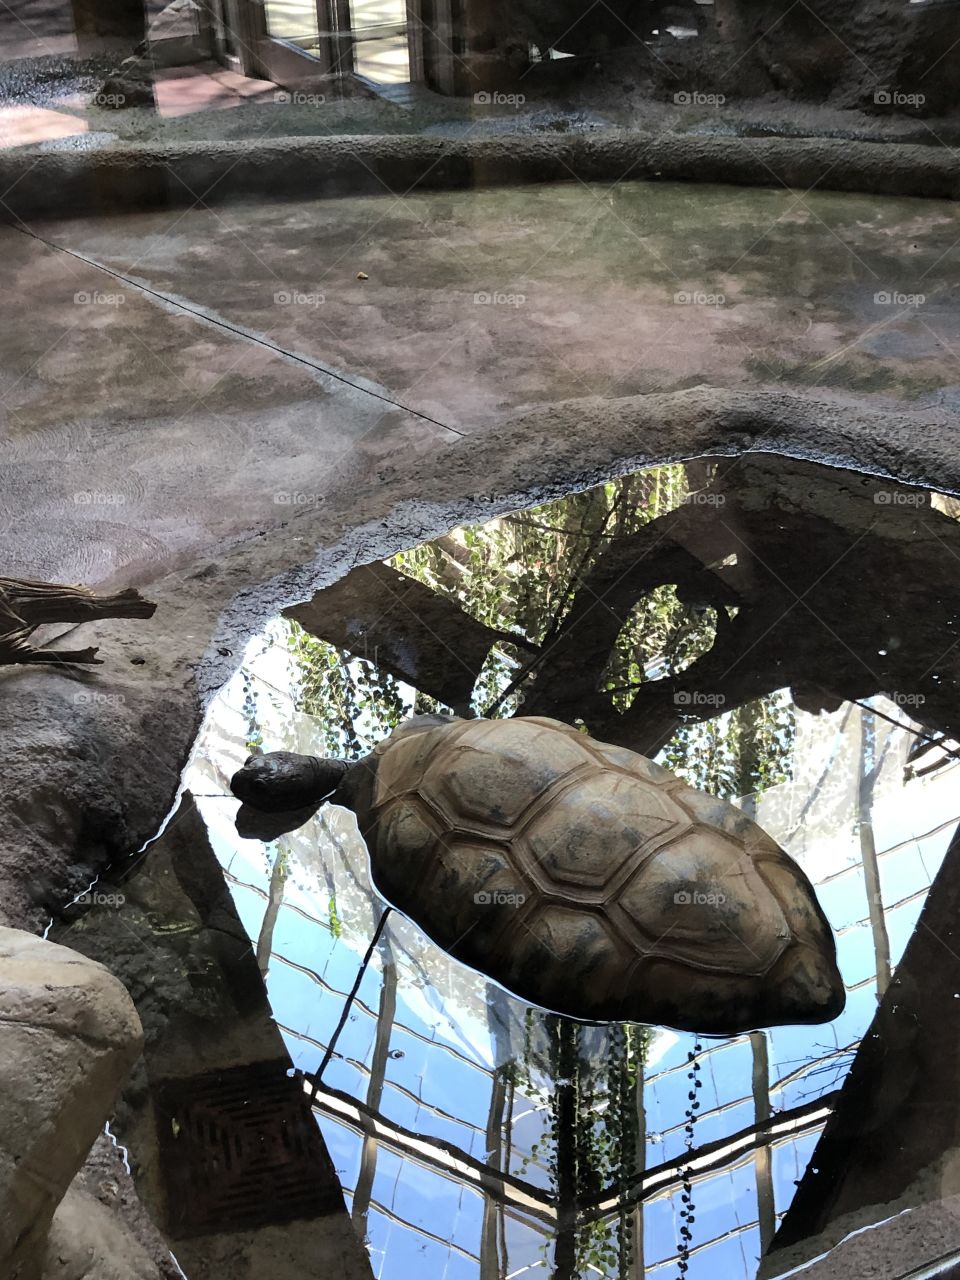 A big old tortoise wadding around in the pool at the Toronto Zoo